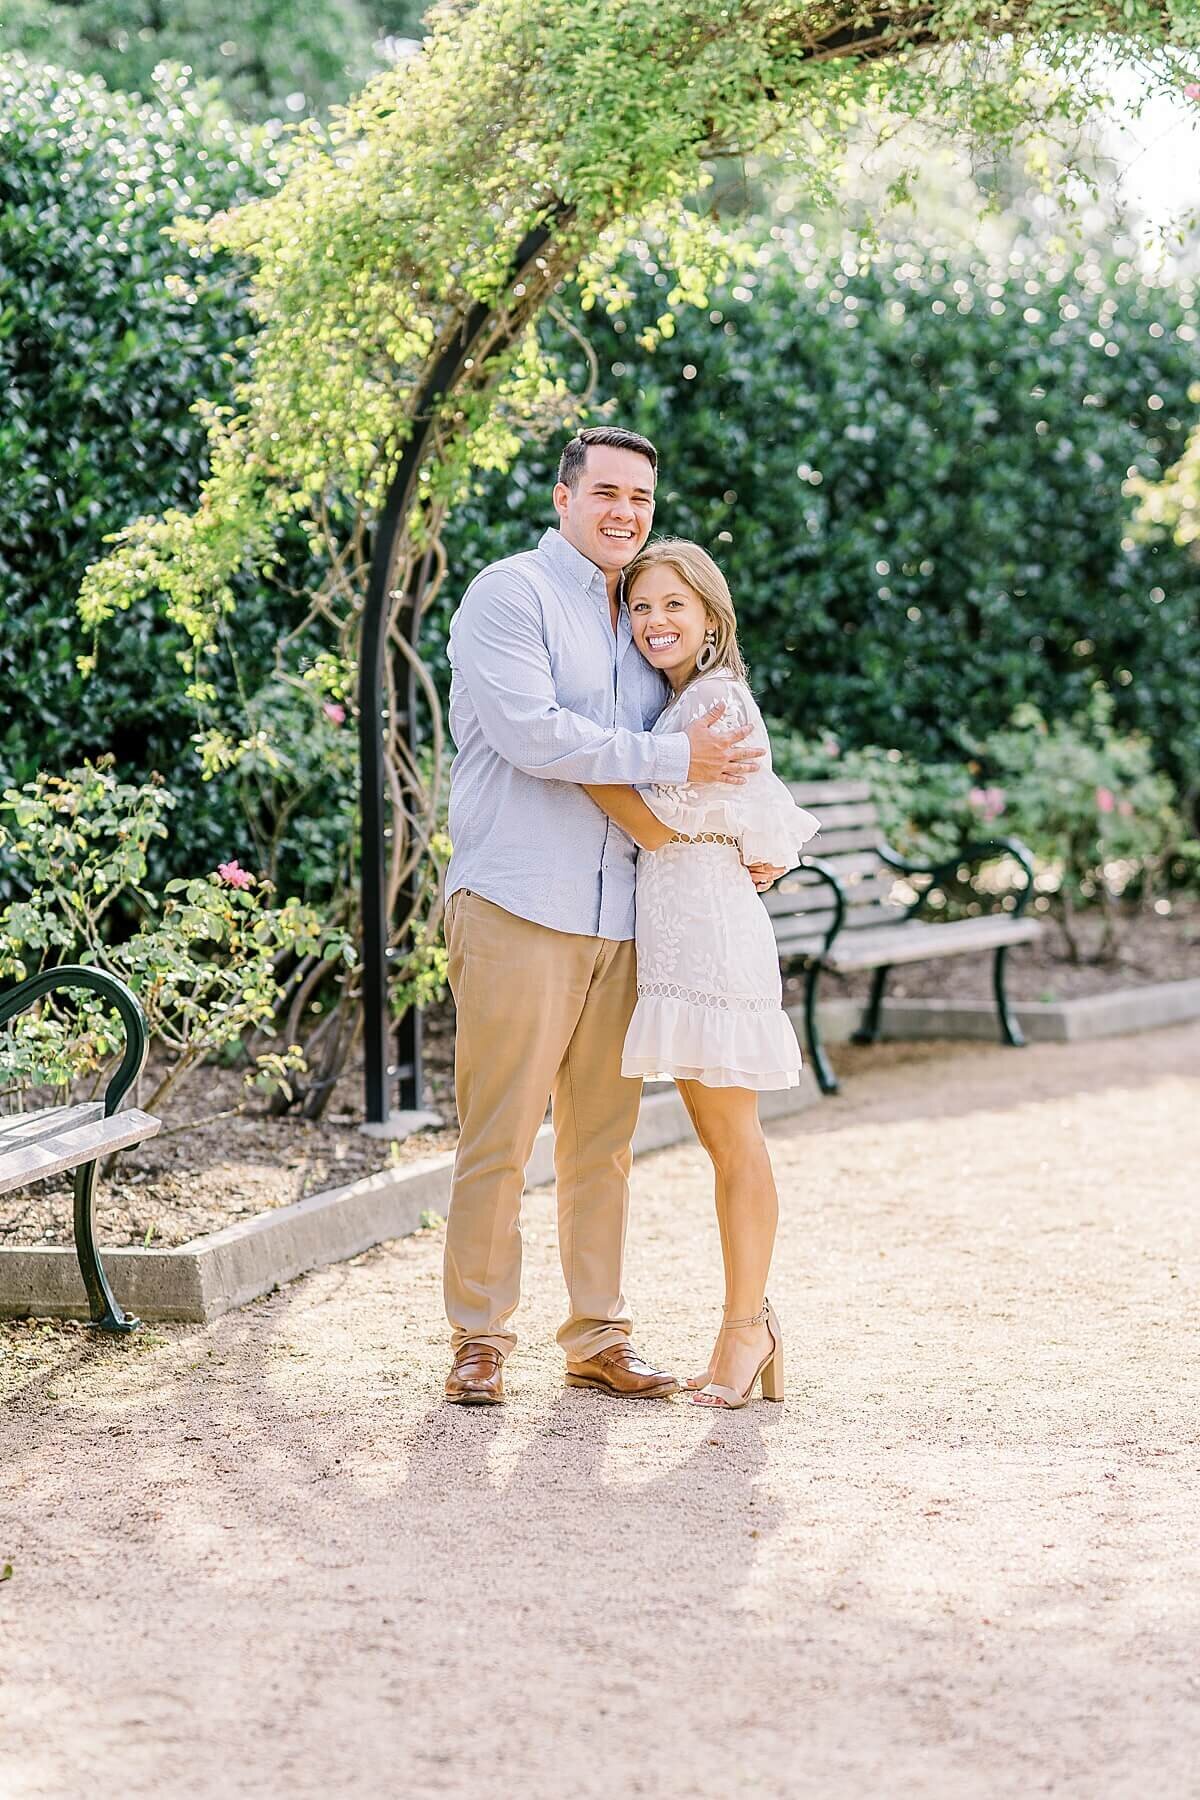 McGovern-Centennial-Gardens-Hermann-Park-Engagement-Session-Alicia-Yarrish-Photography_0043